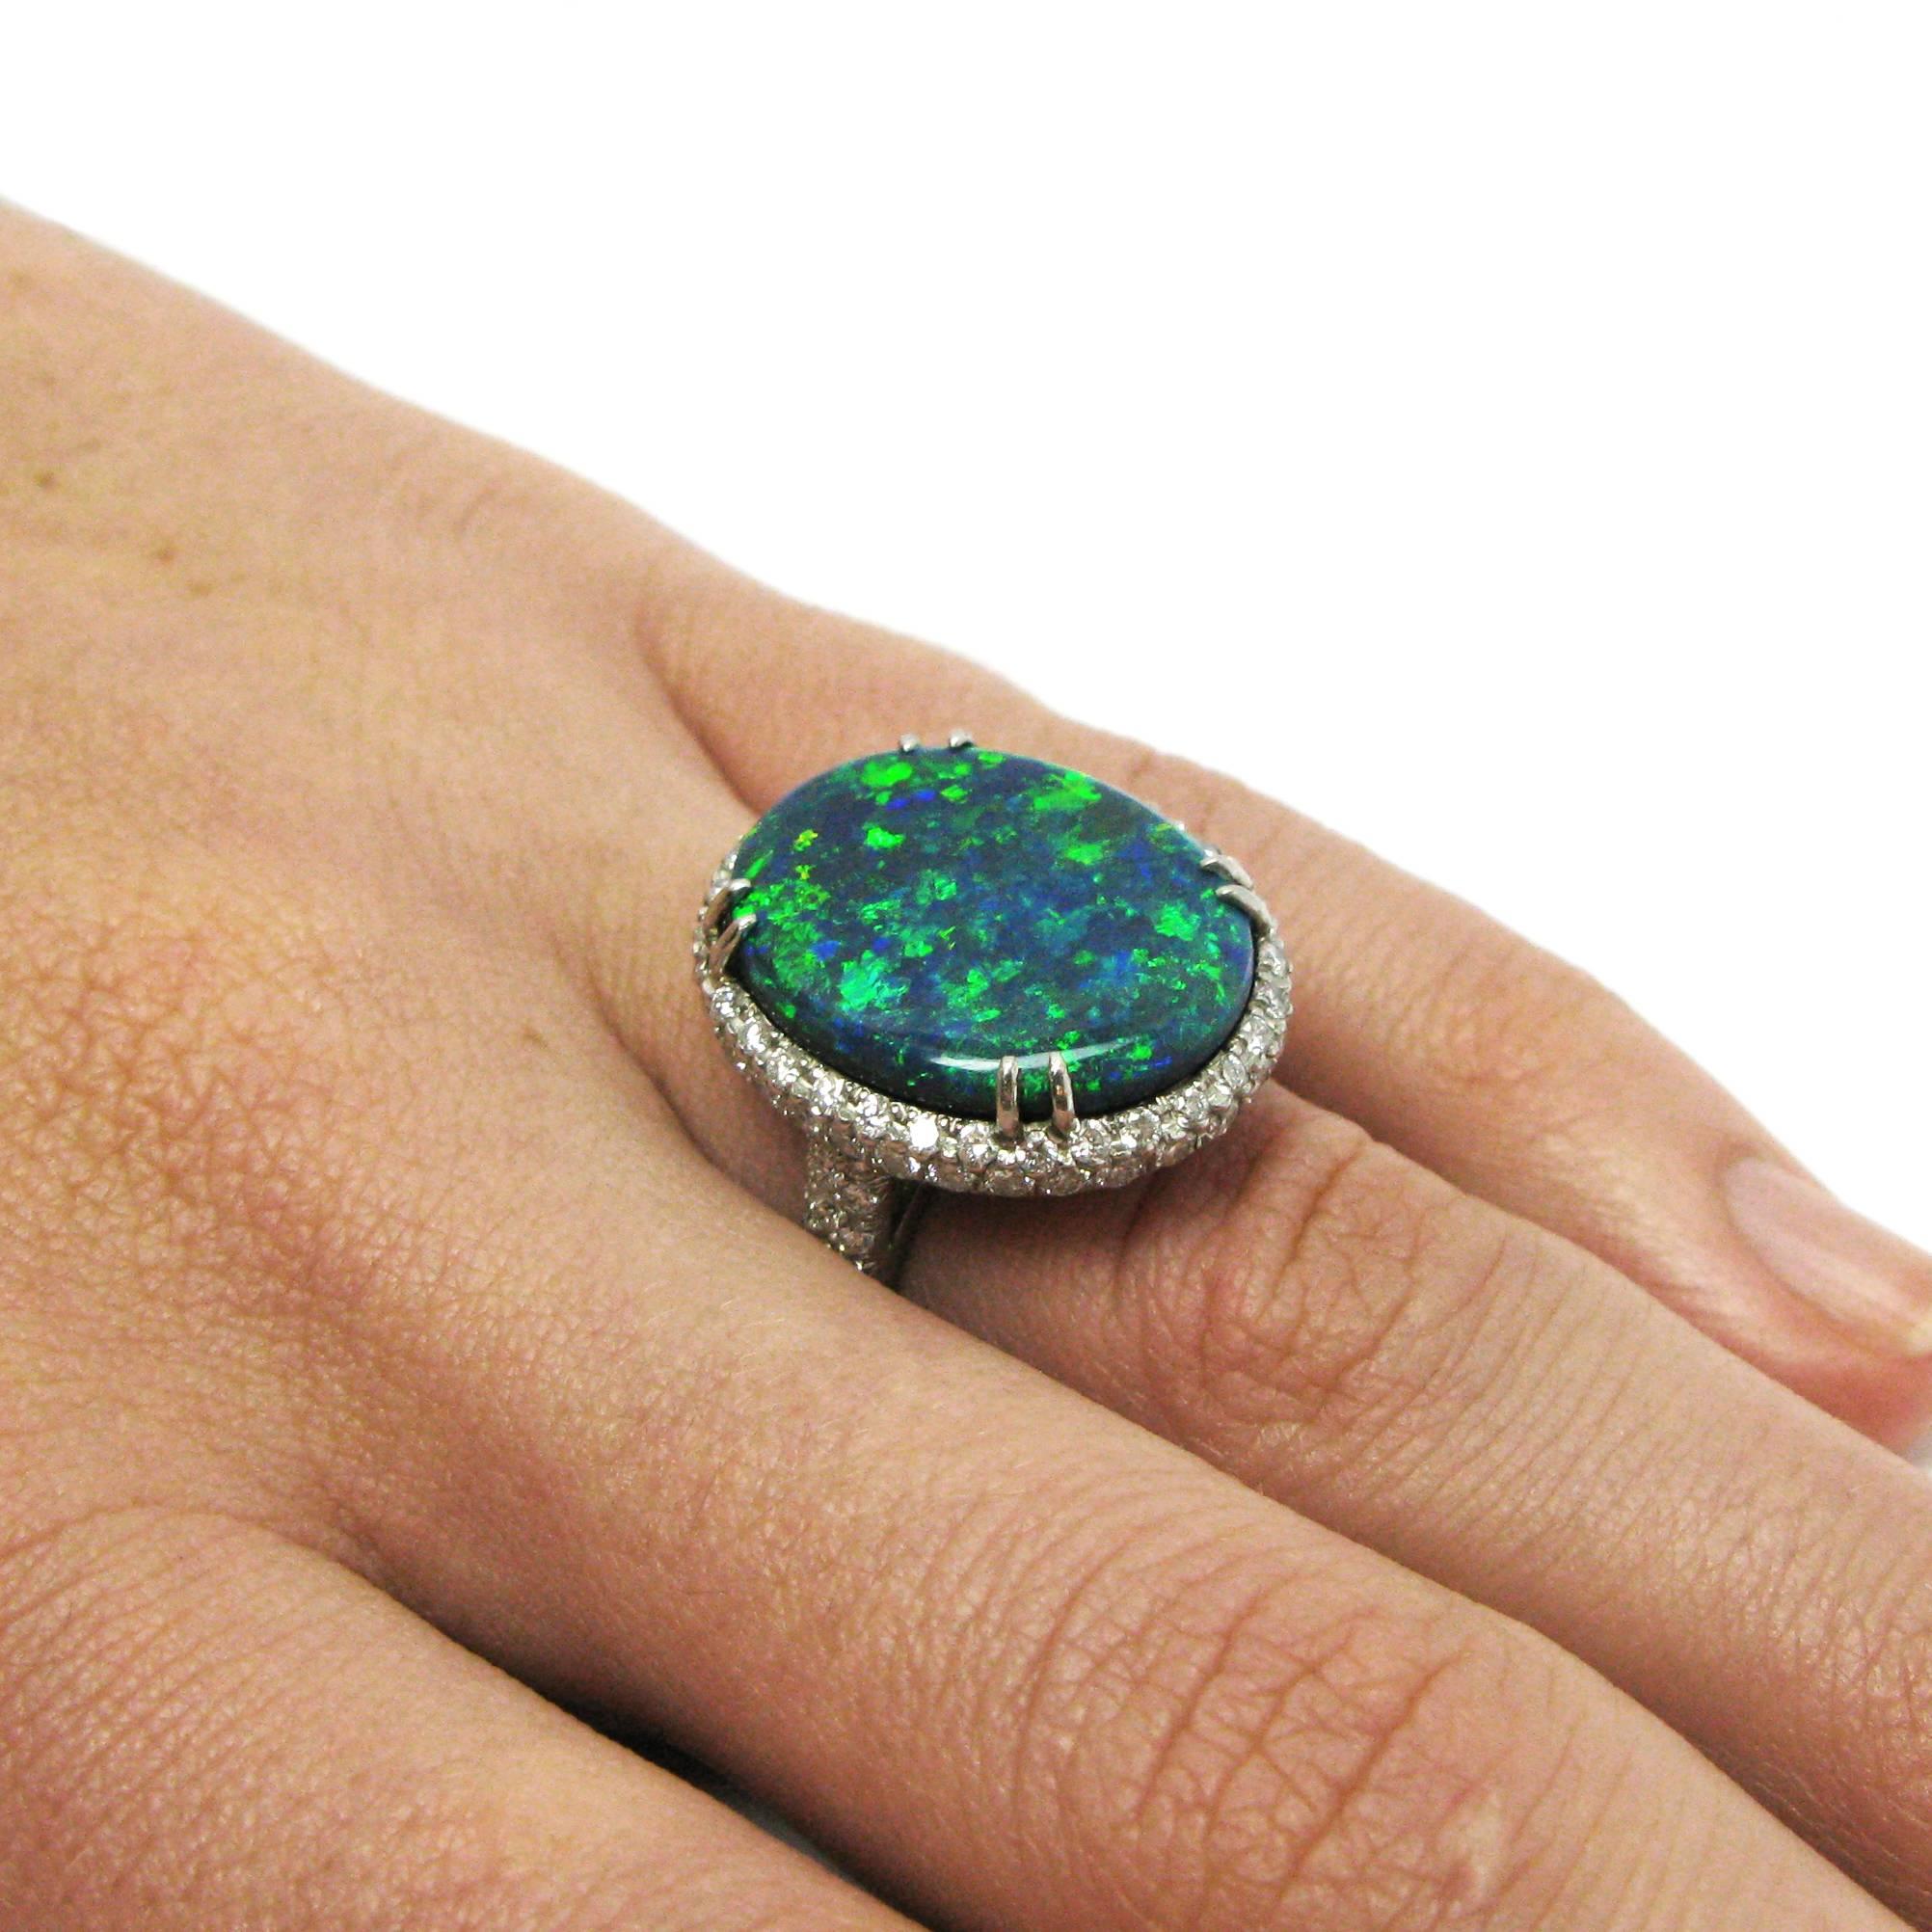 A spectacular ring by American designer Kurt Wayne centers around a jaw-dropping 11.50 carat blue opal with flashes of patchwork green and orange fire. This incredible stone is claw-set in a platinum mounting with 1.80 carats total of pave round-cut